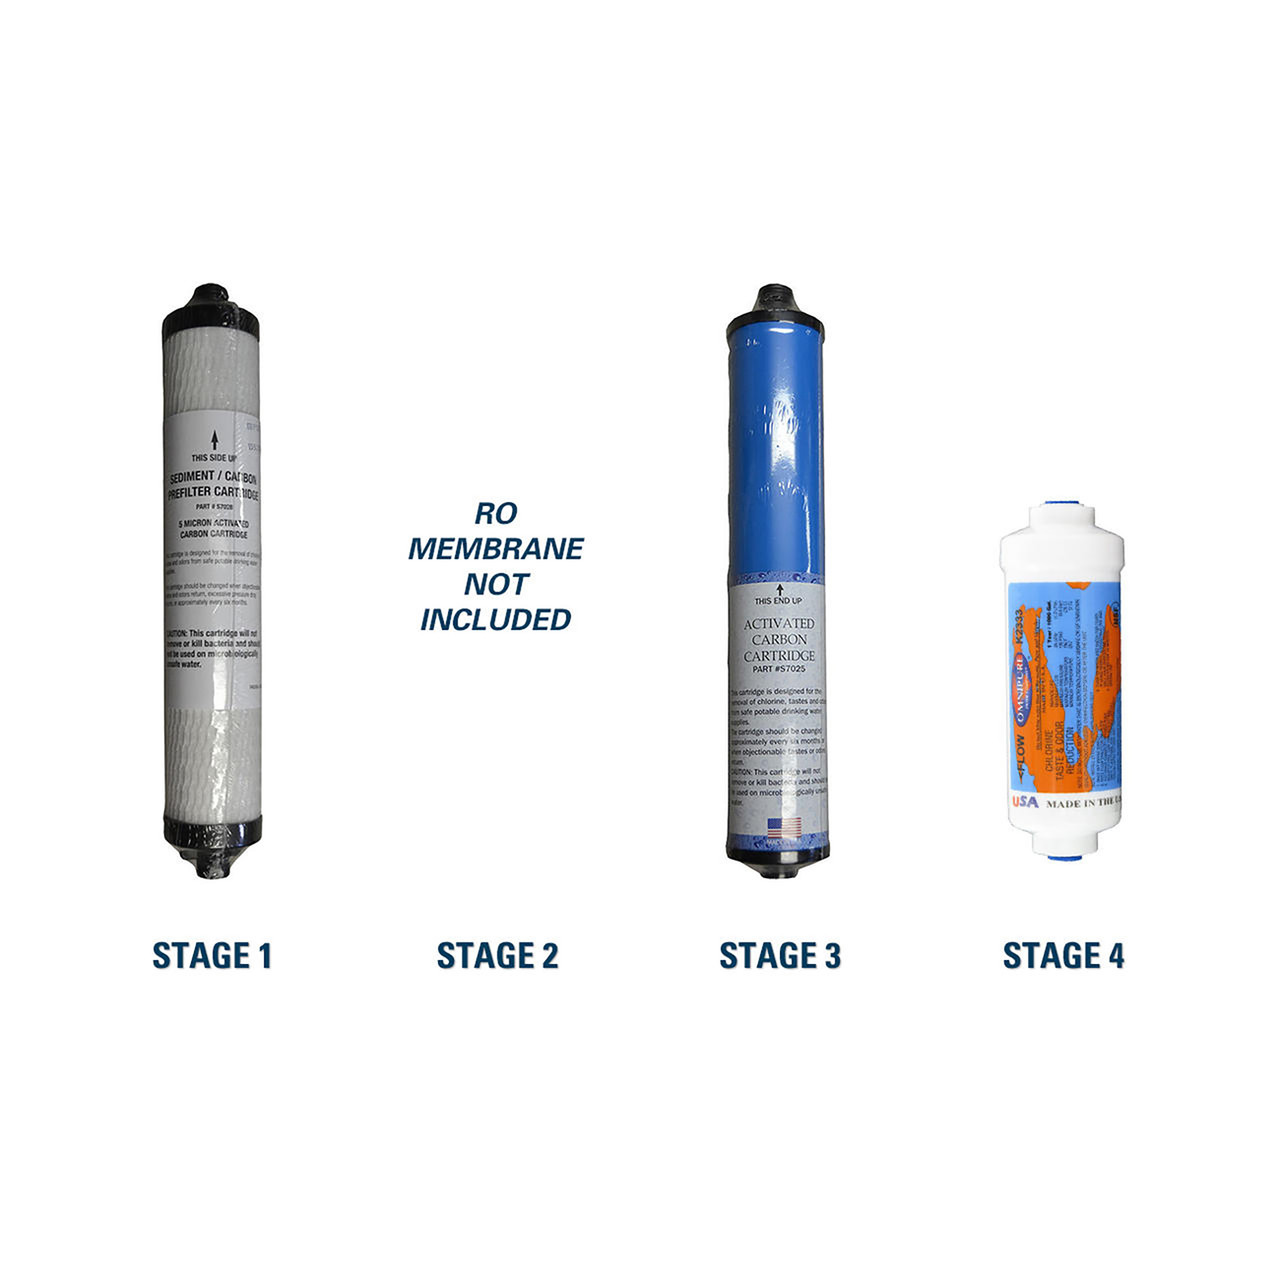 https://cdn11.bigcommerce.com/s-mre1mh/images/stencil/1280x1280/products/5755/4034/microline-tfc-25d-replacement-filter-kit-reverse-osmosis-membrane-sold-separately-ys-mic25d__30826.1691501552.jpg?c=2